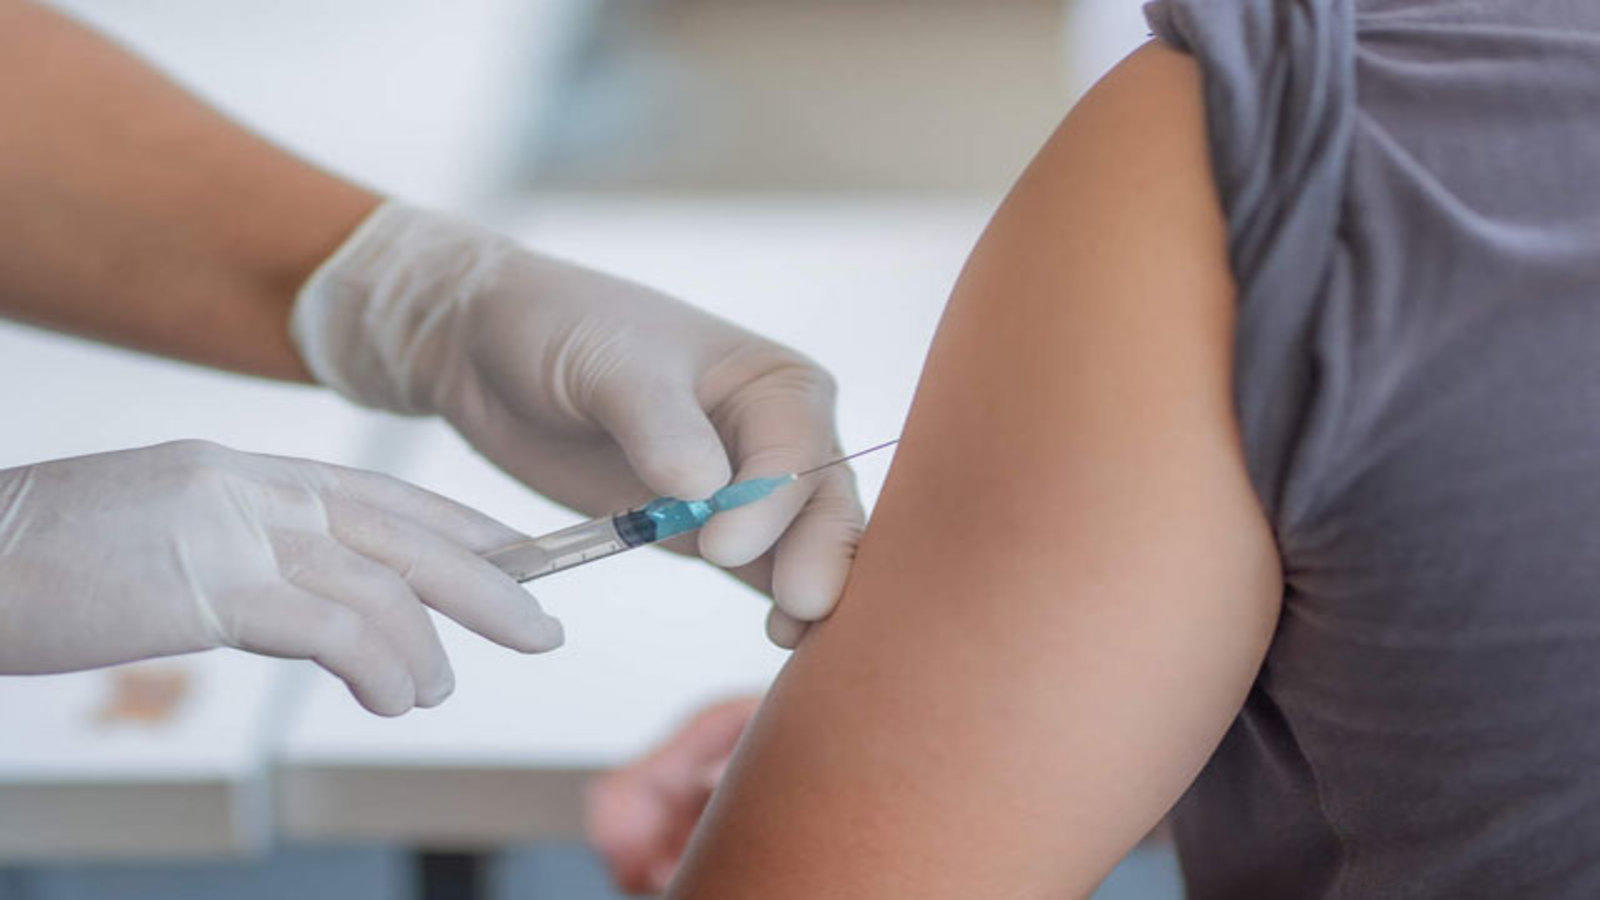 Azerbaijan discloses number of citizens vaccinated against COVID-19